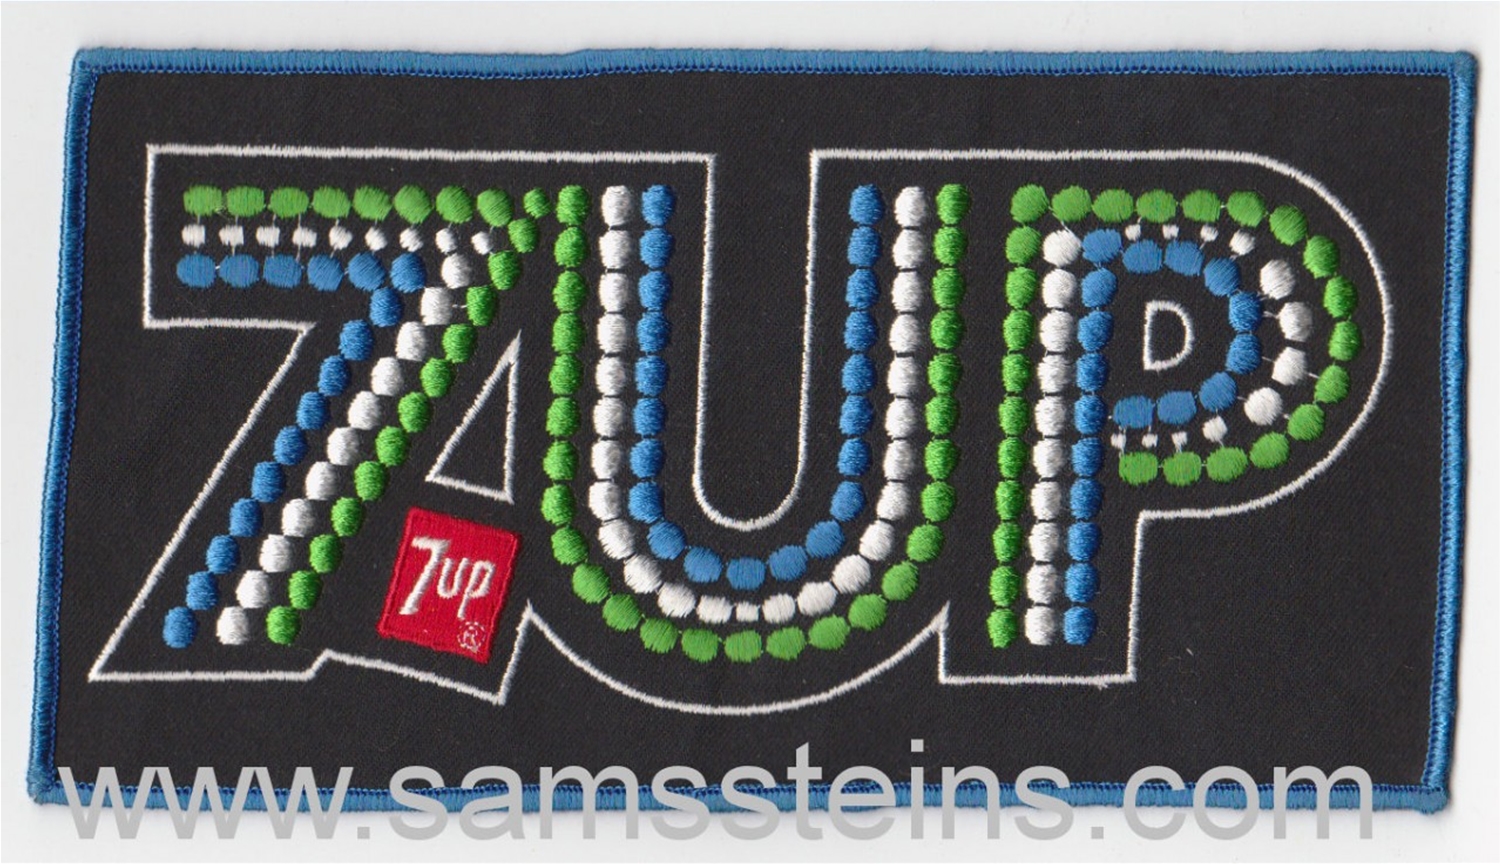 7 UP Patch